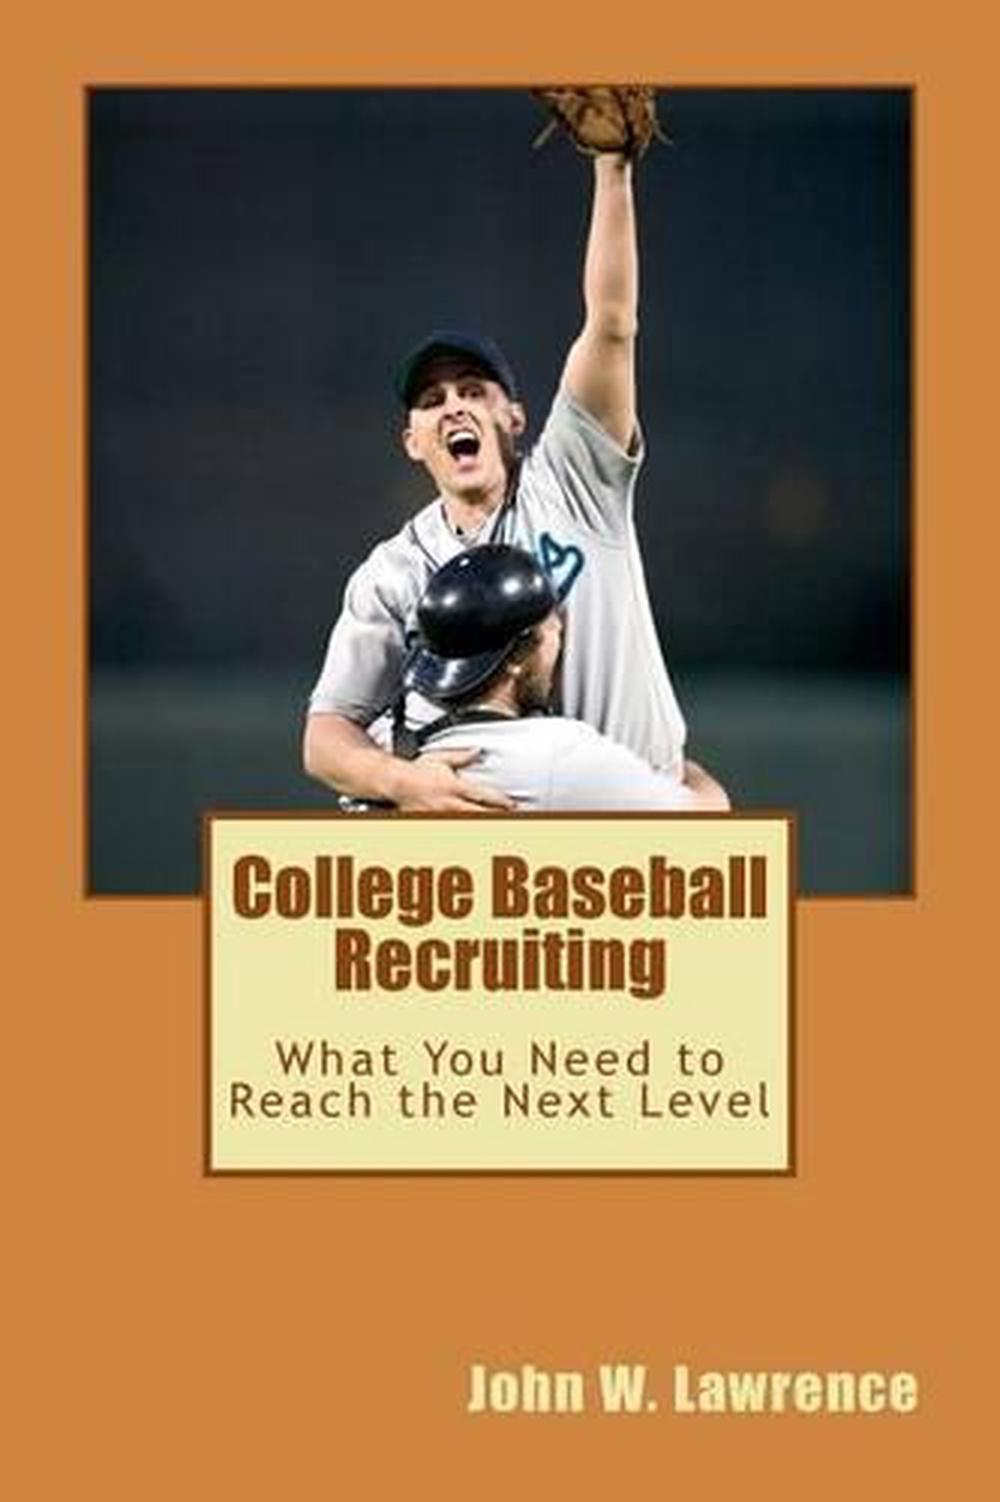 College Baseball Recruiting What You Need to Reach the Next Level by